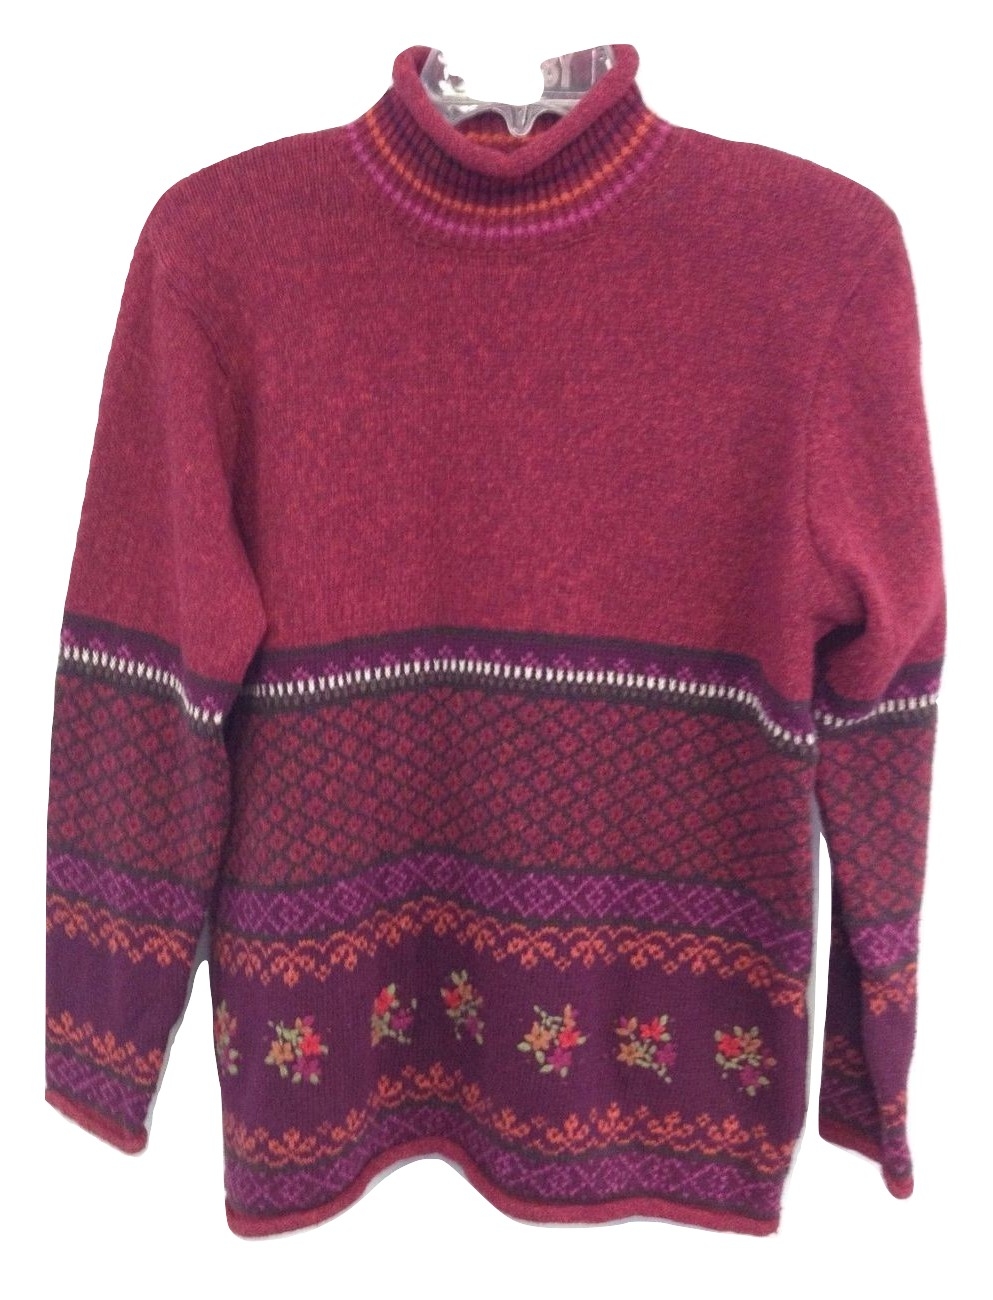 Size S Studio Works Embroidered Sweater in Red